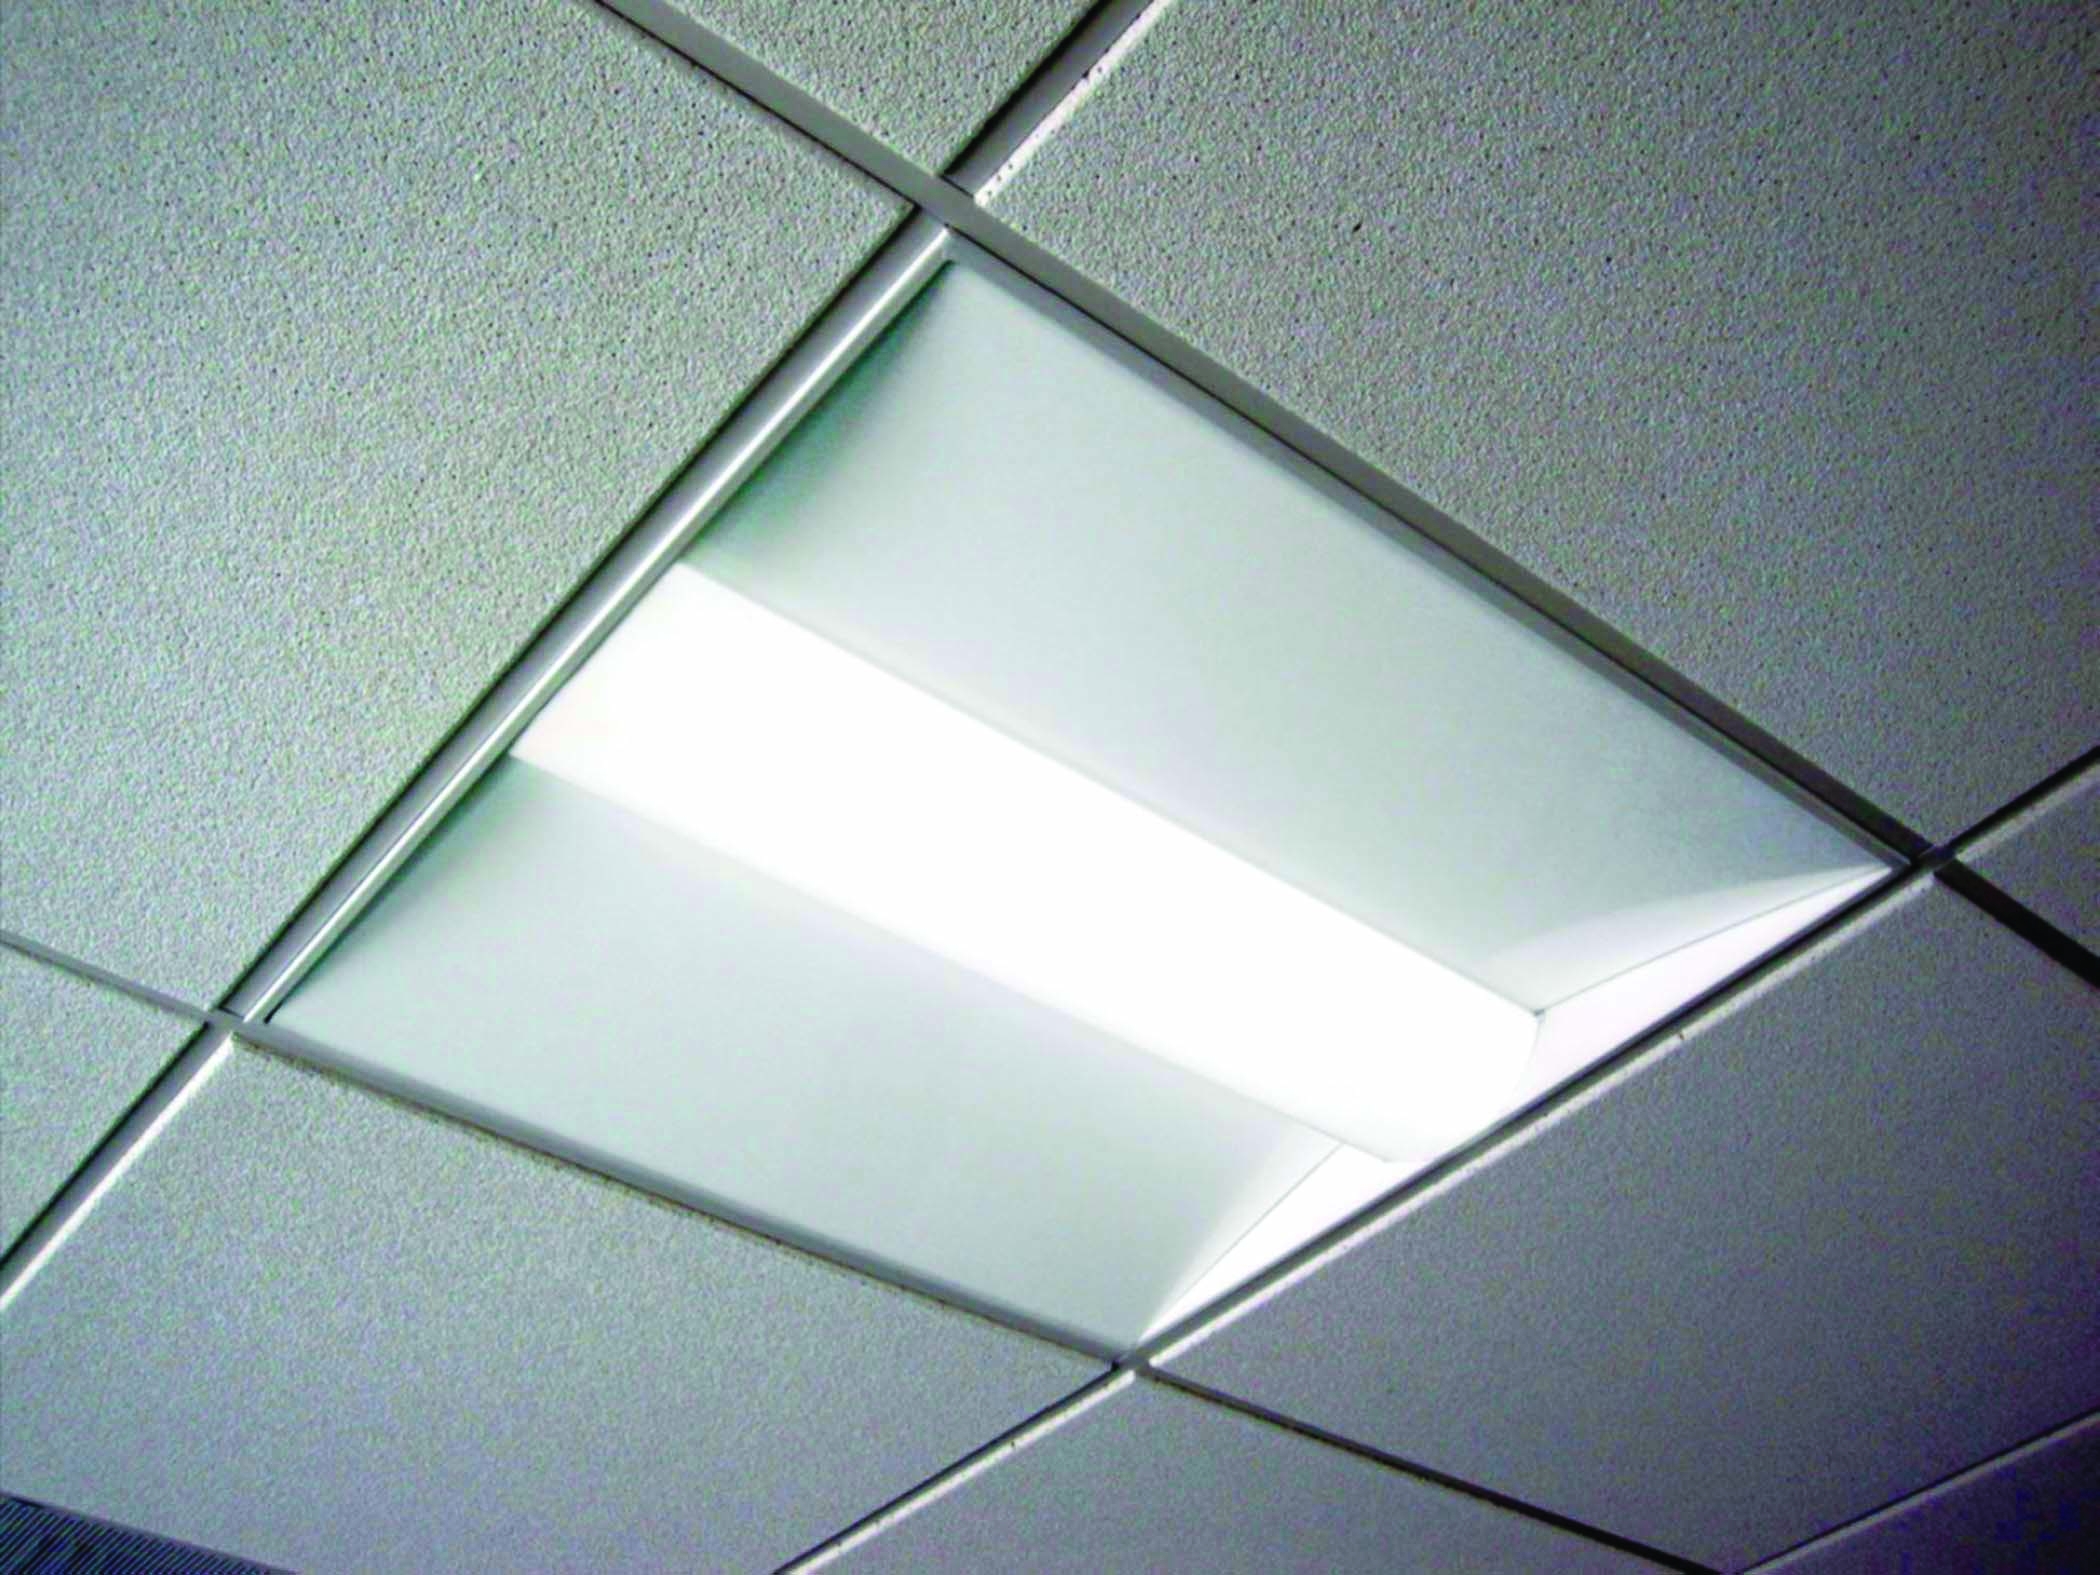 Permalink to 2×2 Led Lighting For Suspended Ceilings